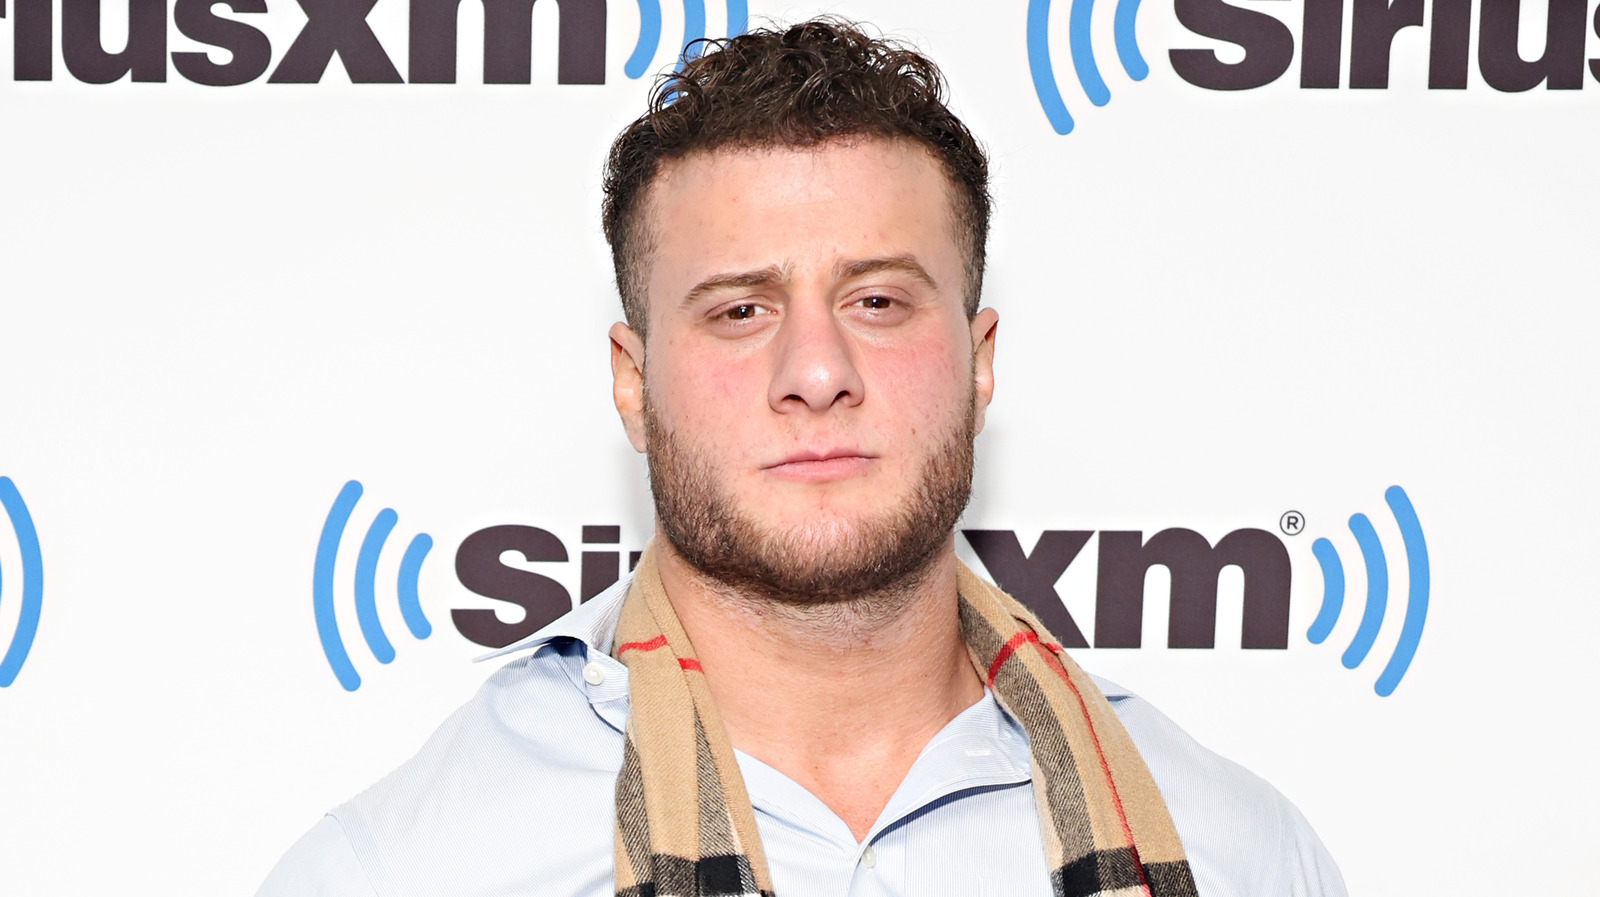 Former AEW Champ MJF Calls Out The Rock For WWE Star's Recent Social Media Post